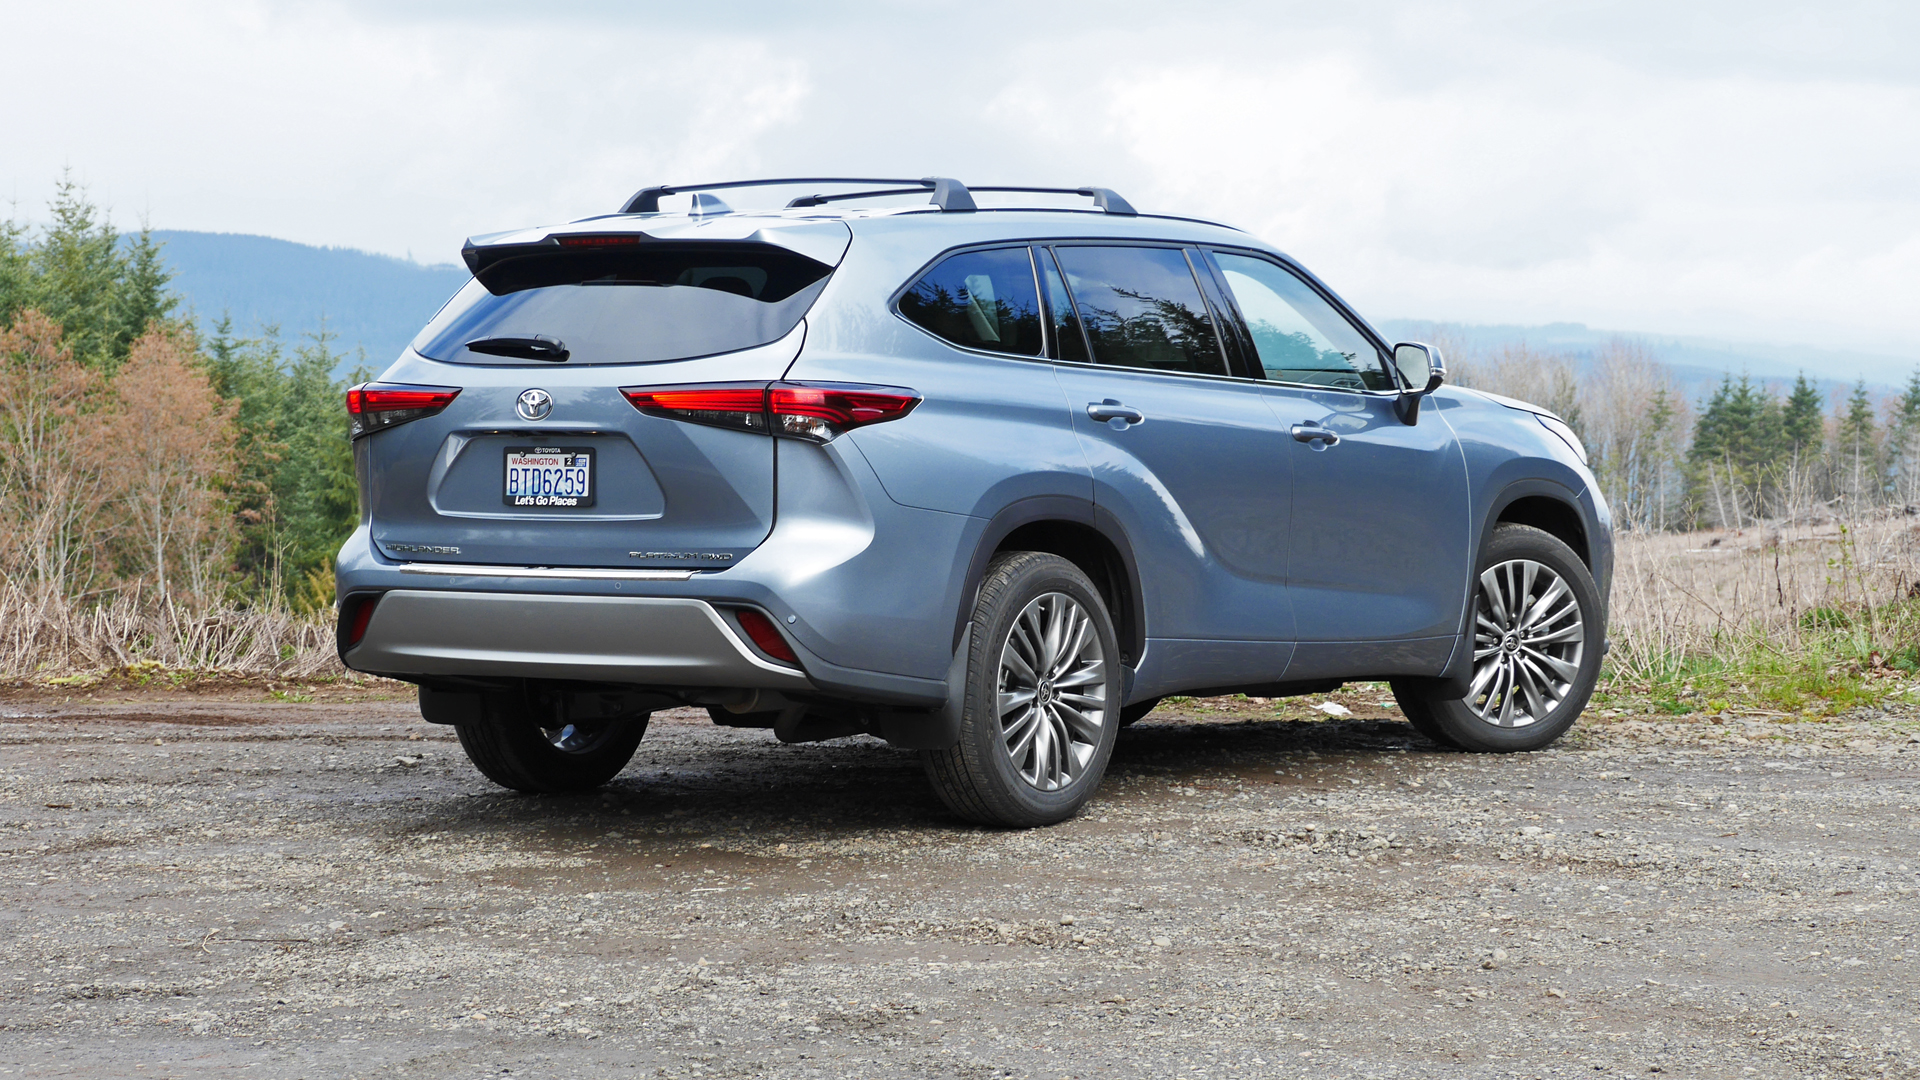 2021 Toyota Highlander Review | What's new, size, fuel economy, pictures